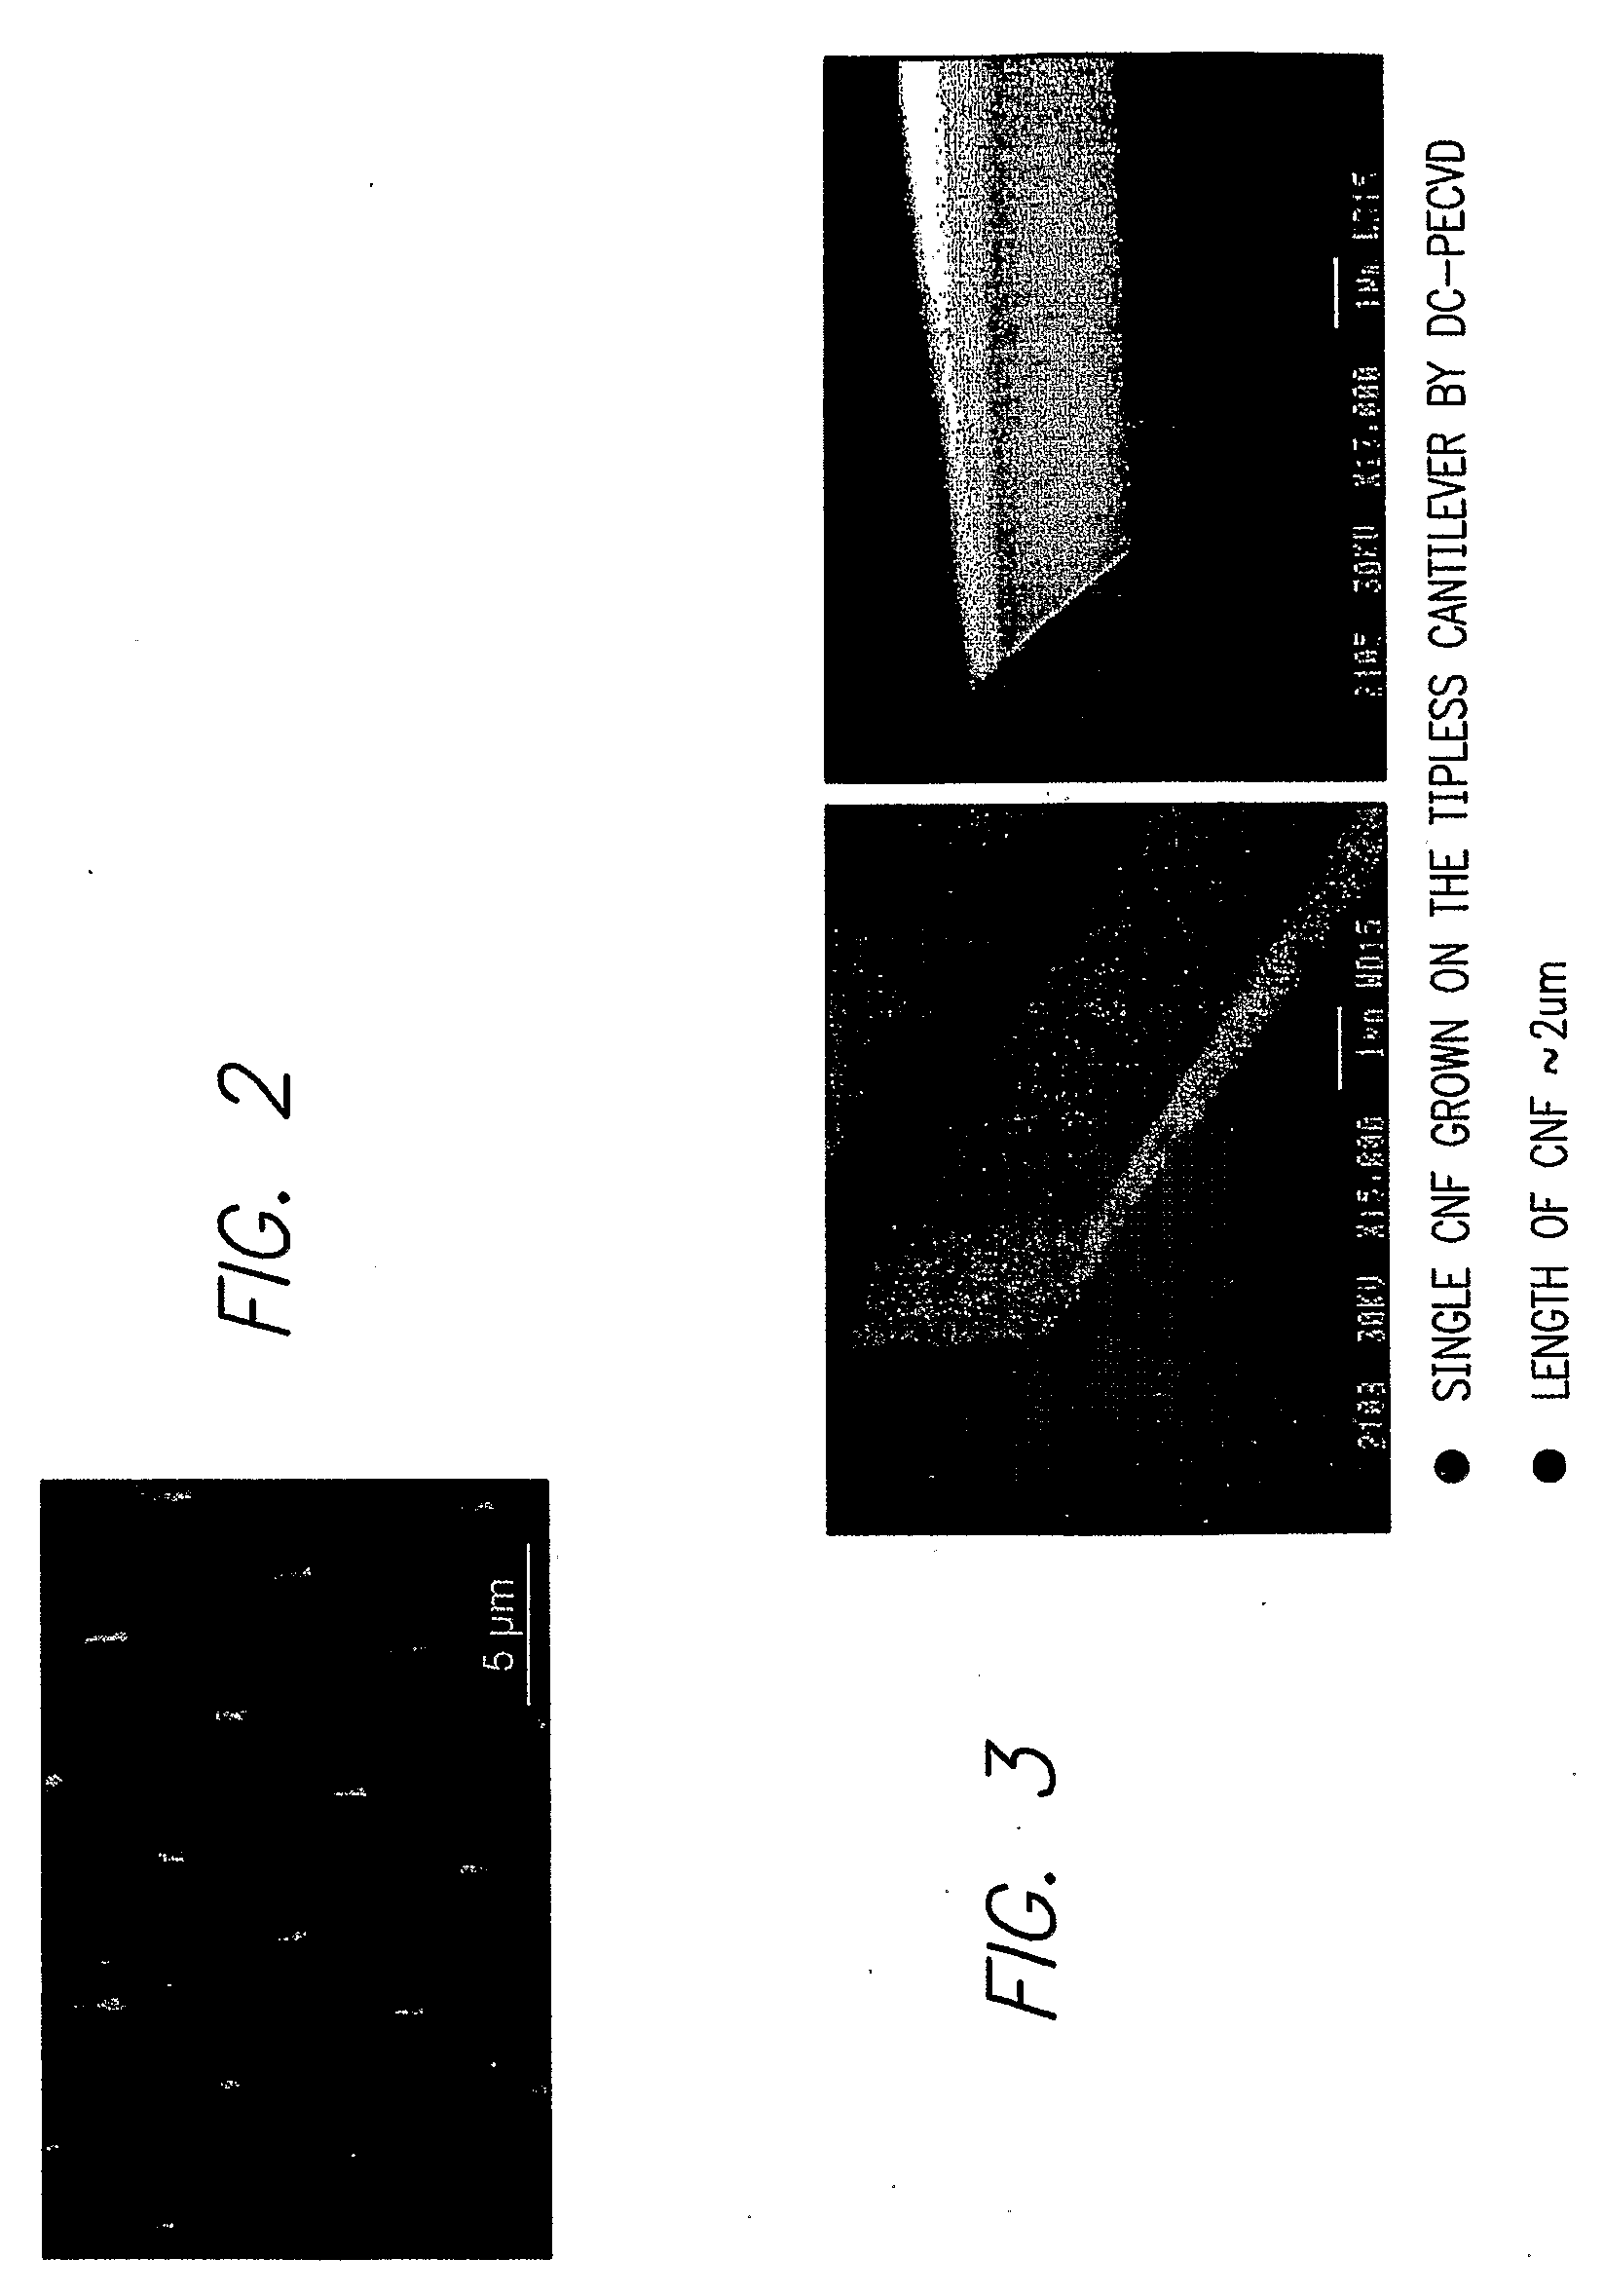 Probe System Comprising an Electric-Field-Aligned Probe Tip and Method for Fabricating the Same